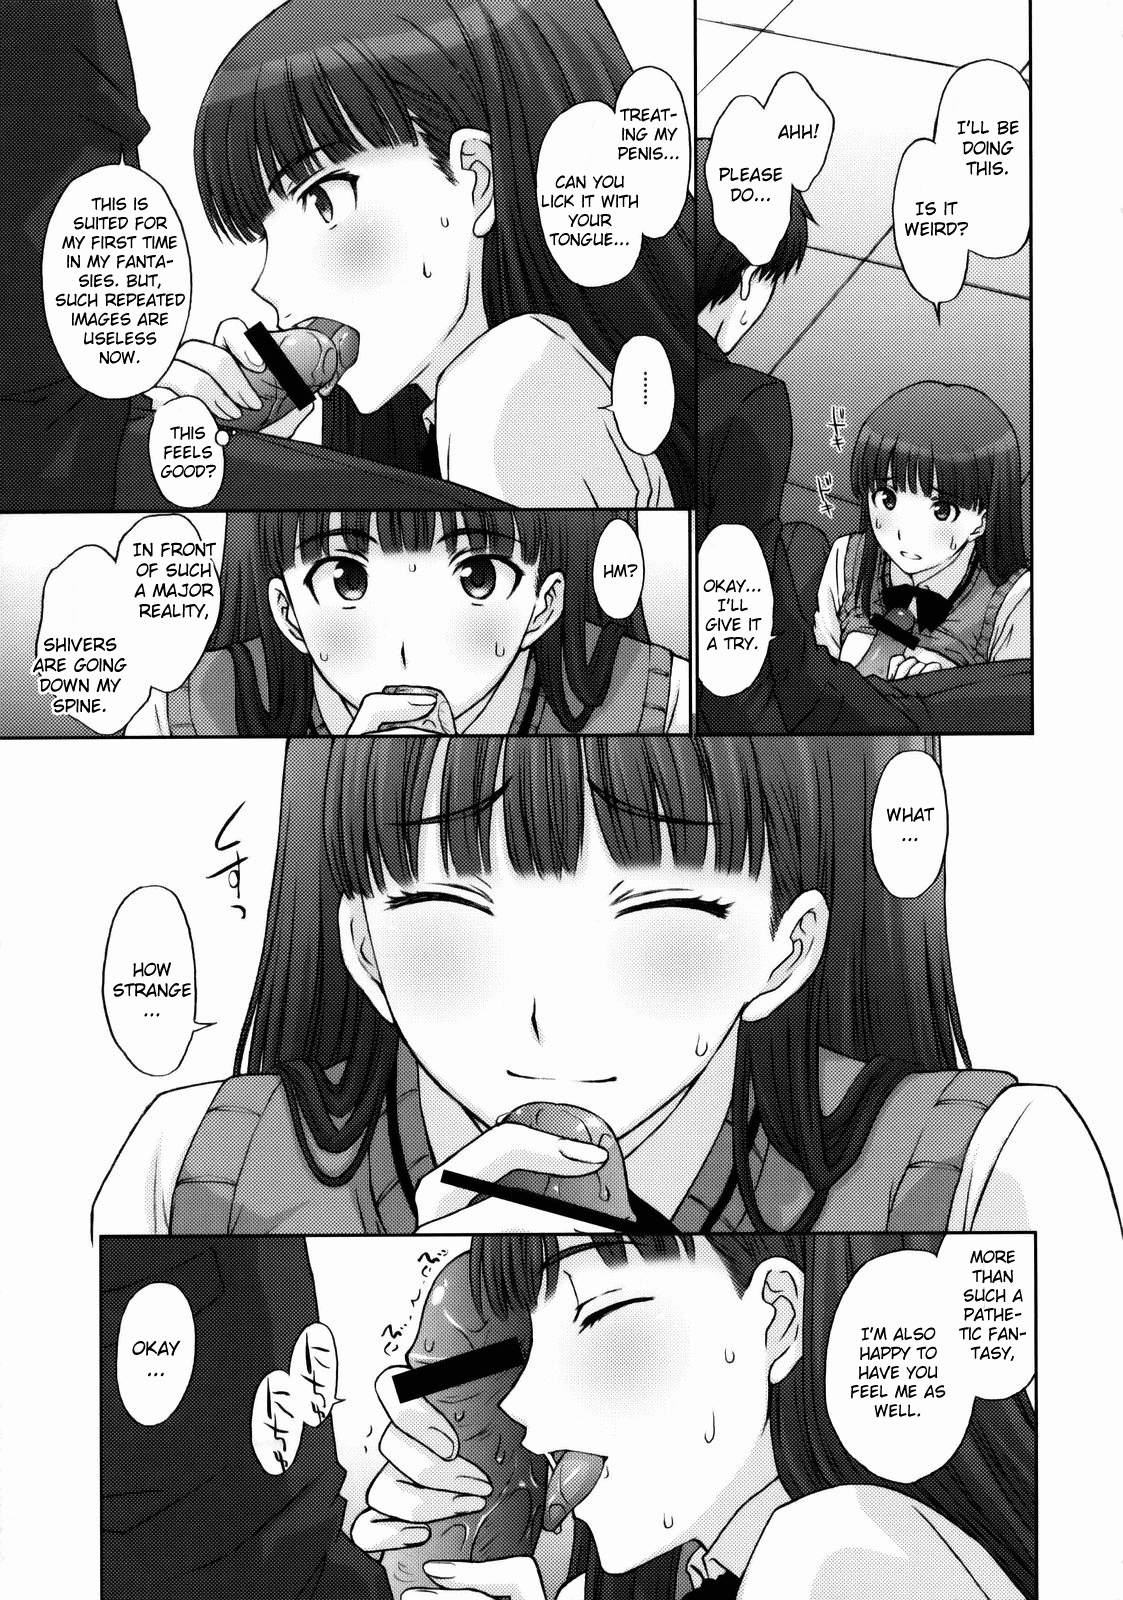 [Secret Society M] The Masked Honor Student and the Perverted Gentleman (Amagami) [English] 